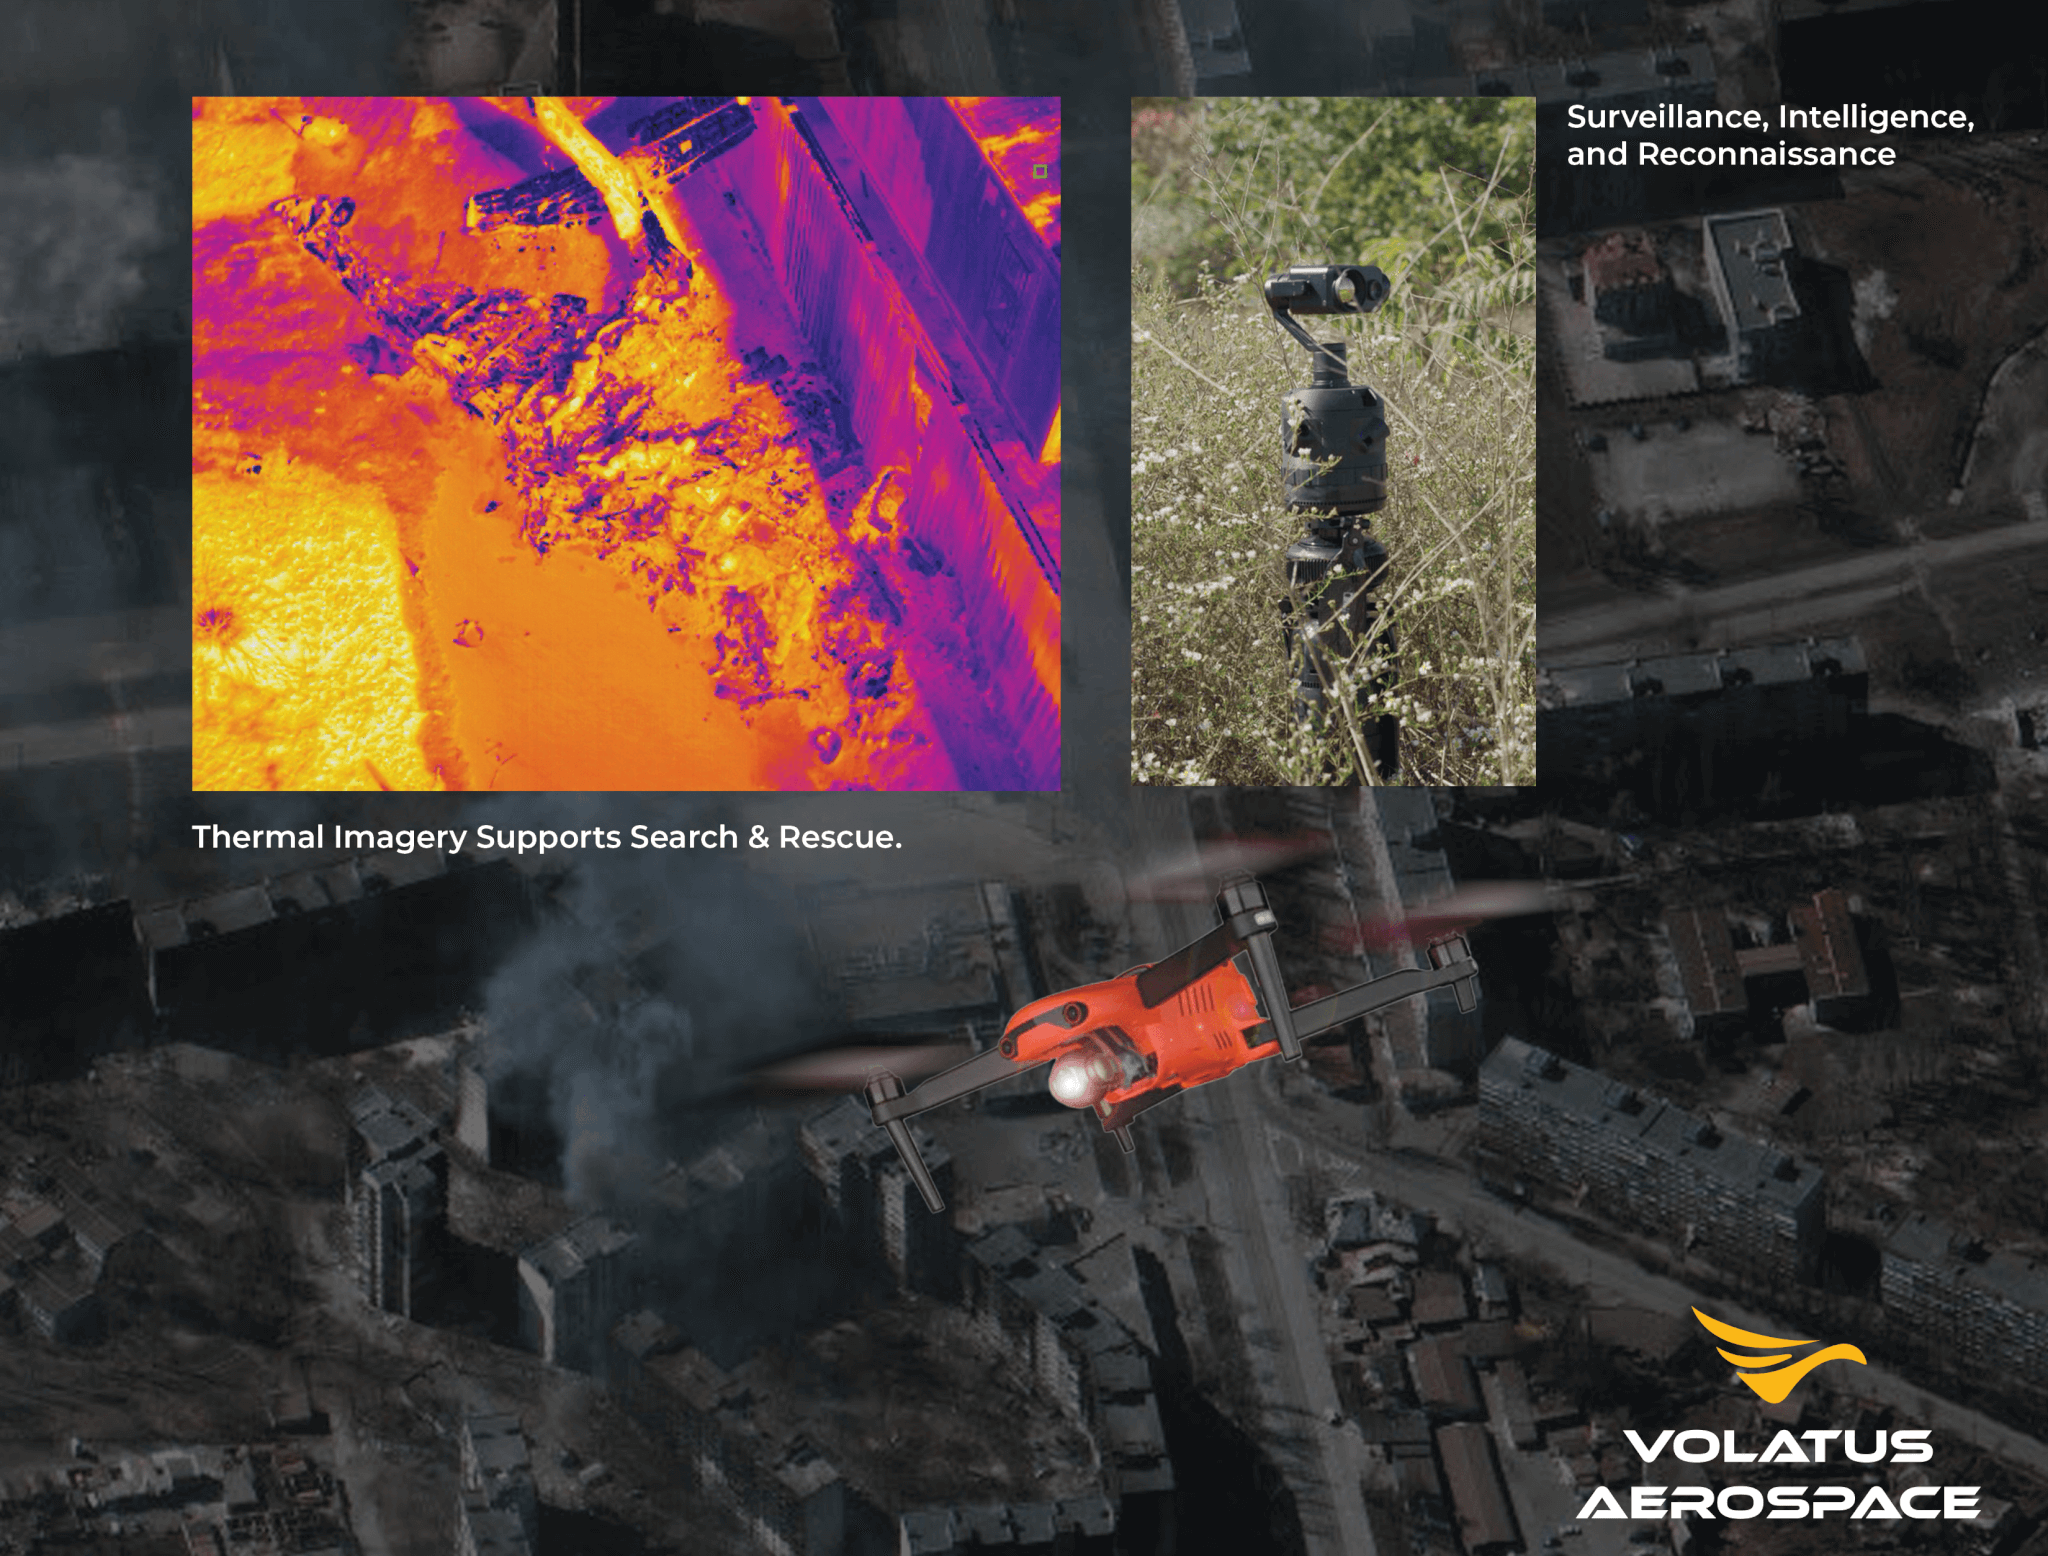 Volatus supplies Ukrainian humanitarian agencies with drone enabled thermal imaging, eyes in the sky to perform search and rescue, surveillance, intelligence, and reconnaissance missions.